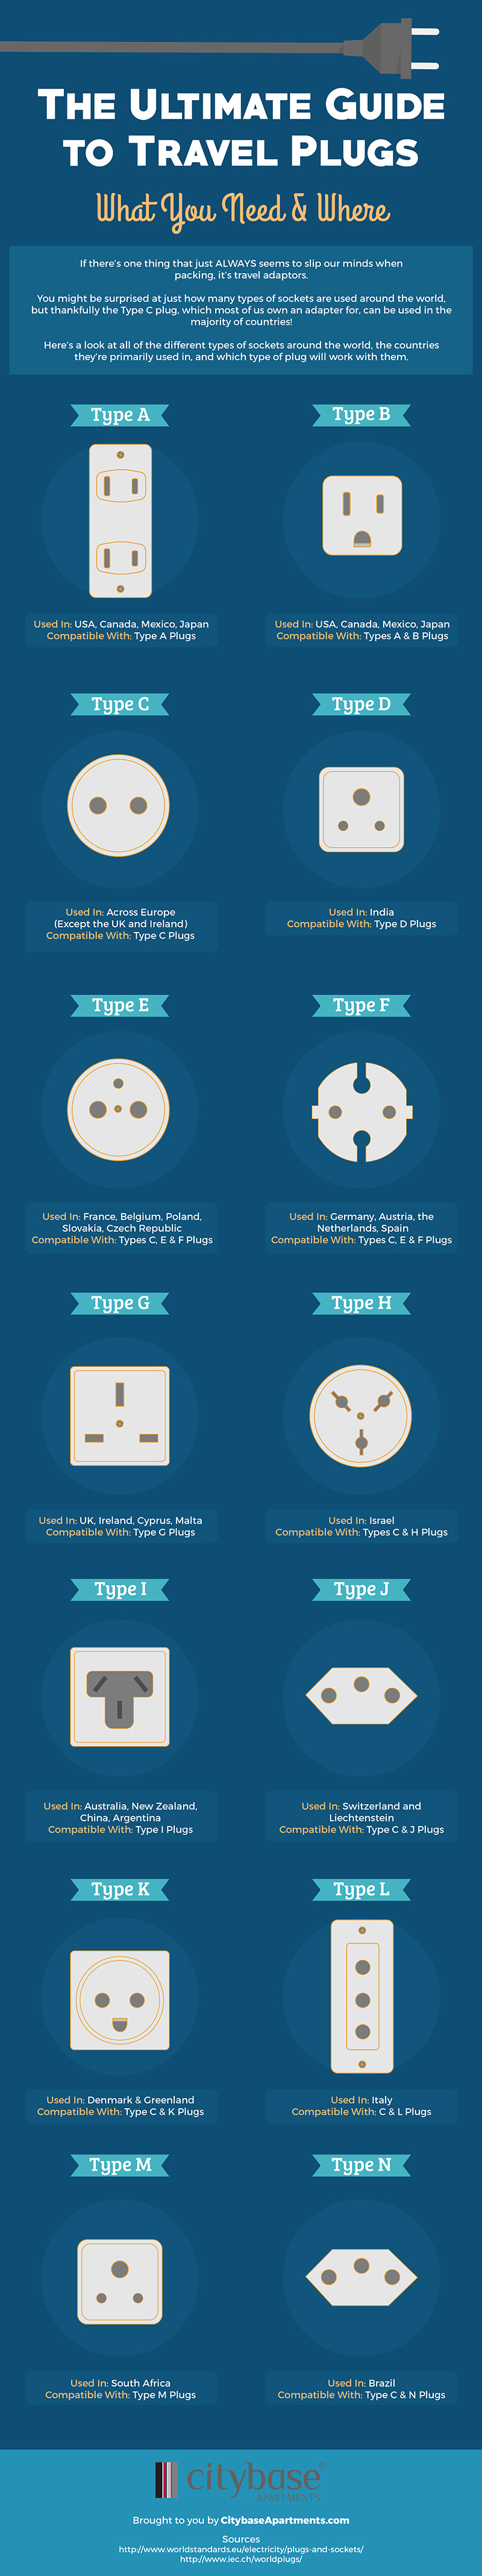 ultimate-guide-to-travel-plugs